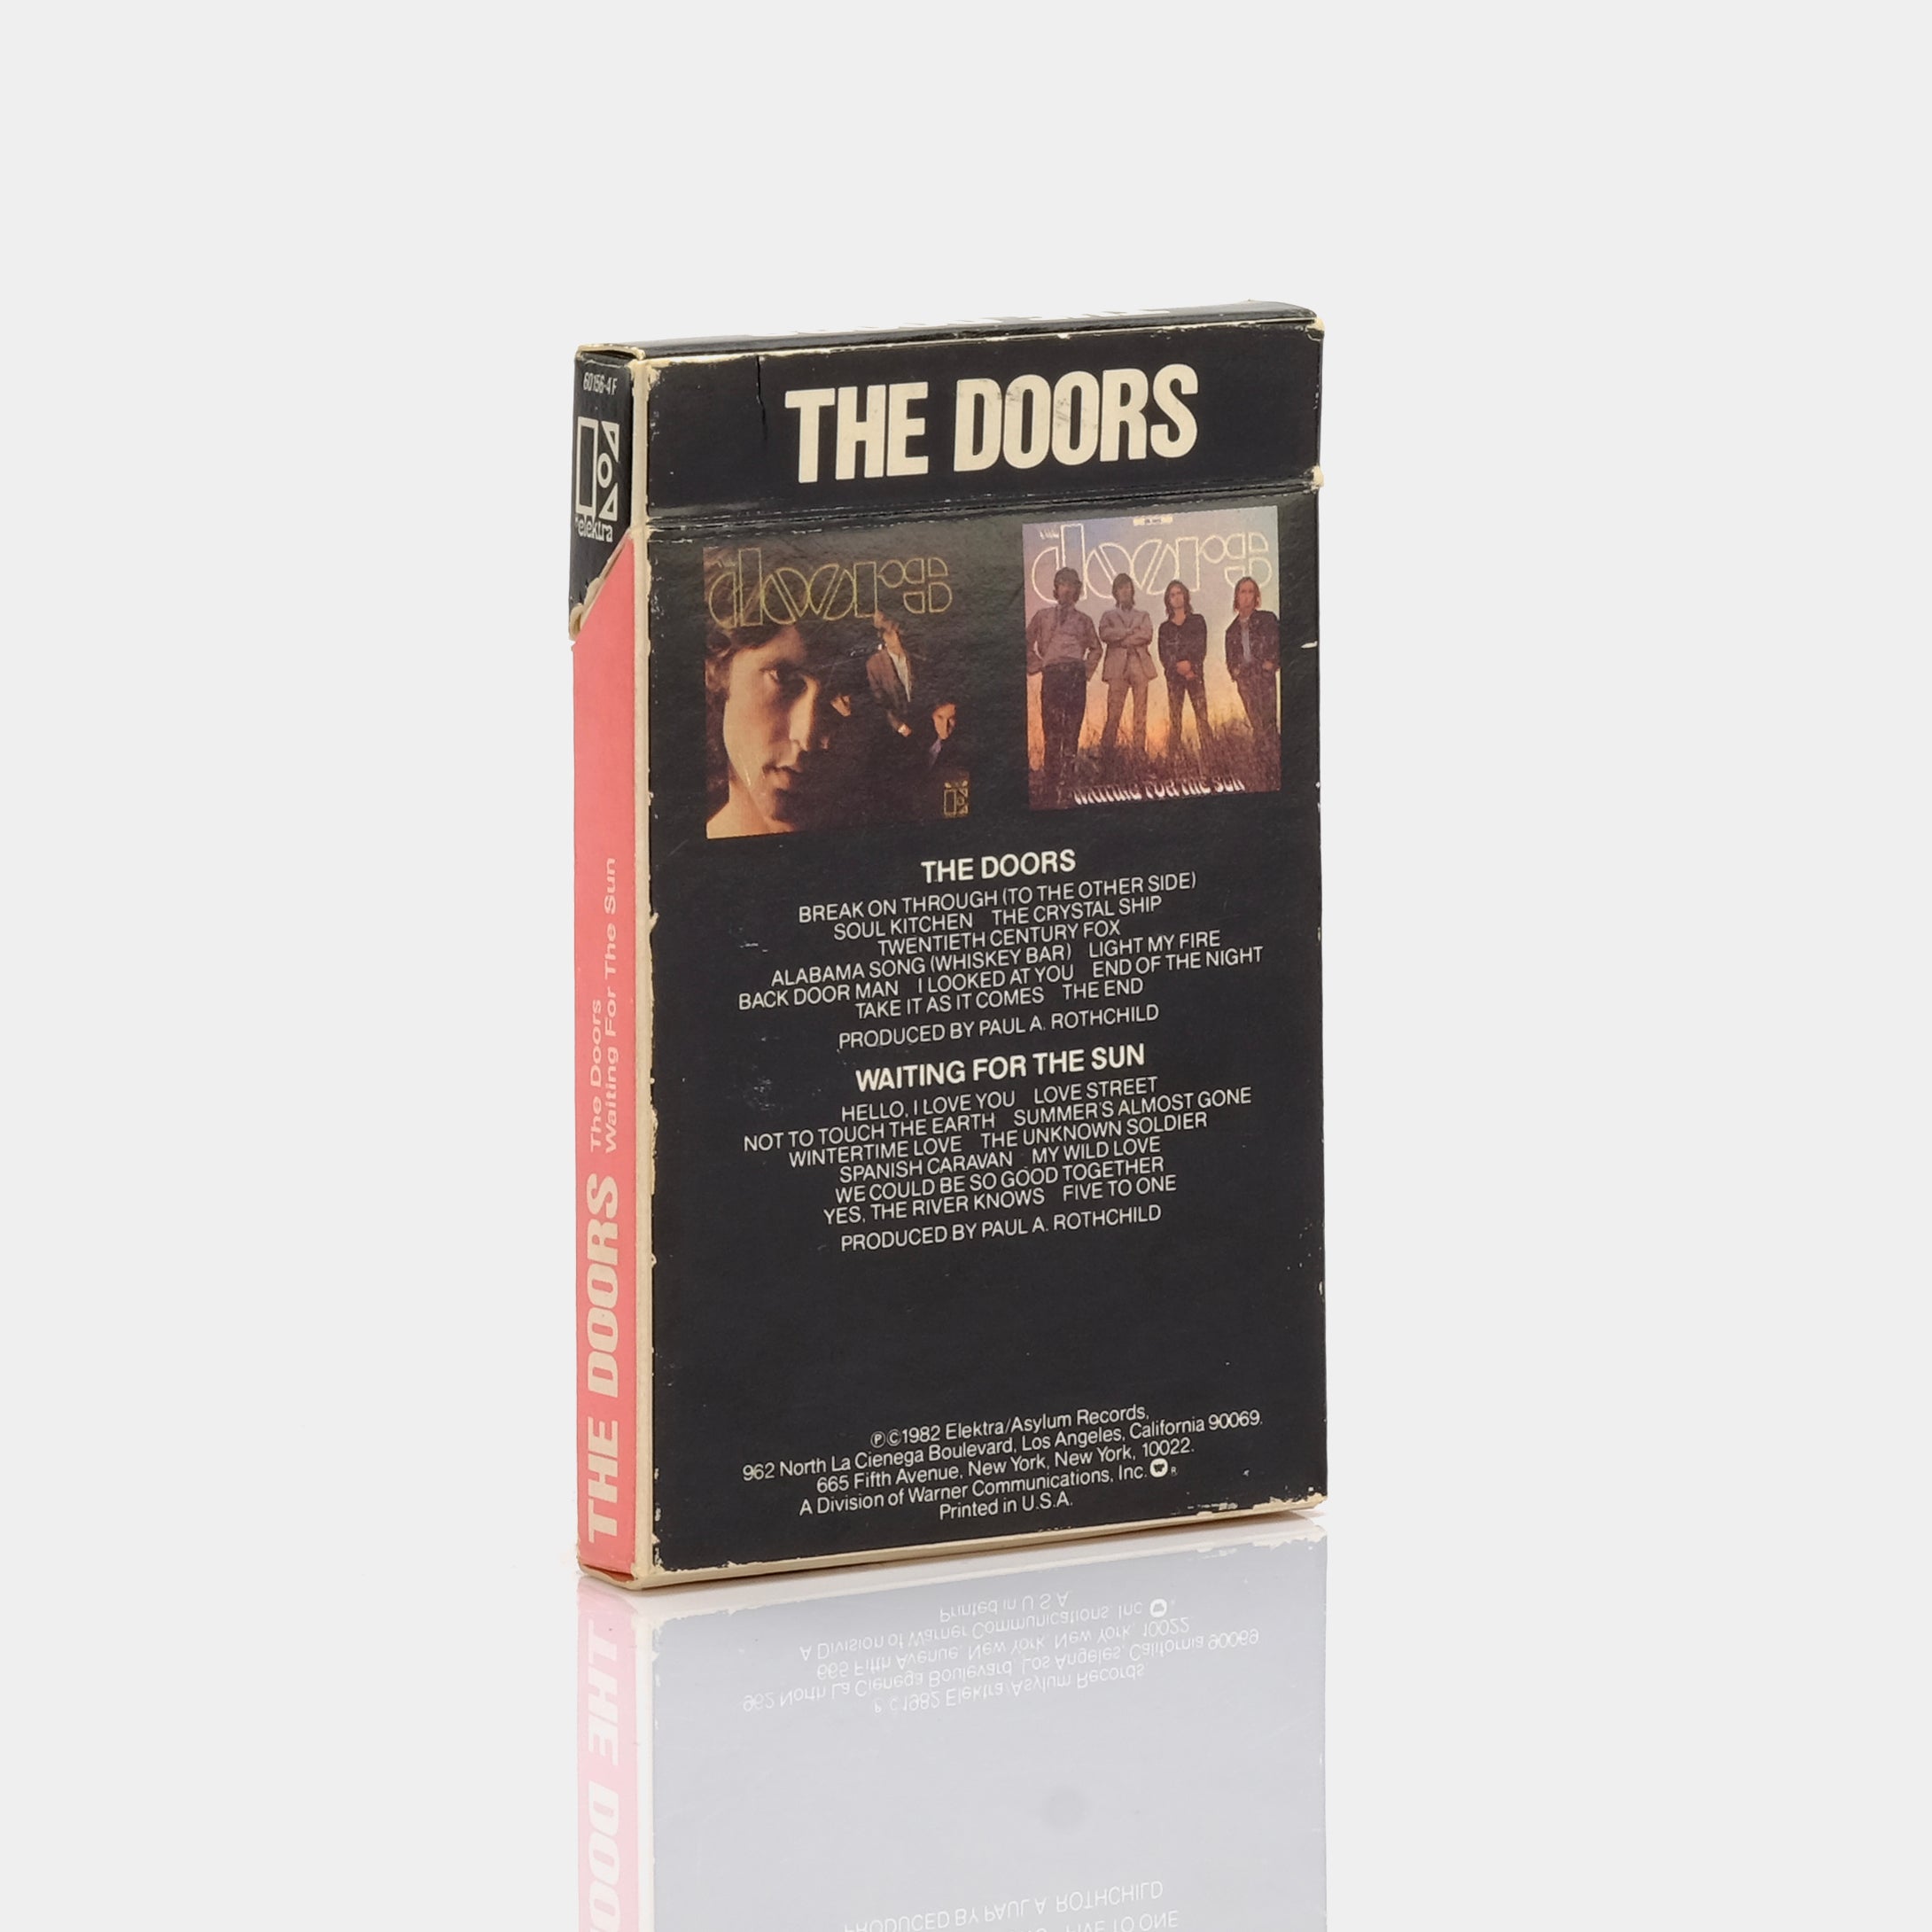 The Doors - The Doors/Waiting For The Sun Cassette Tape